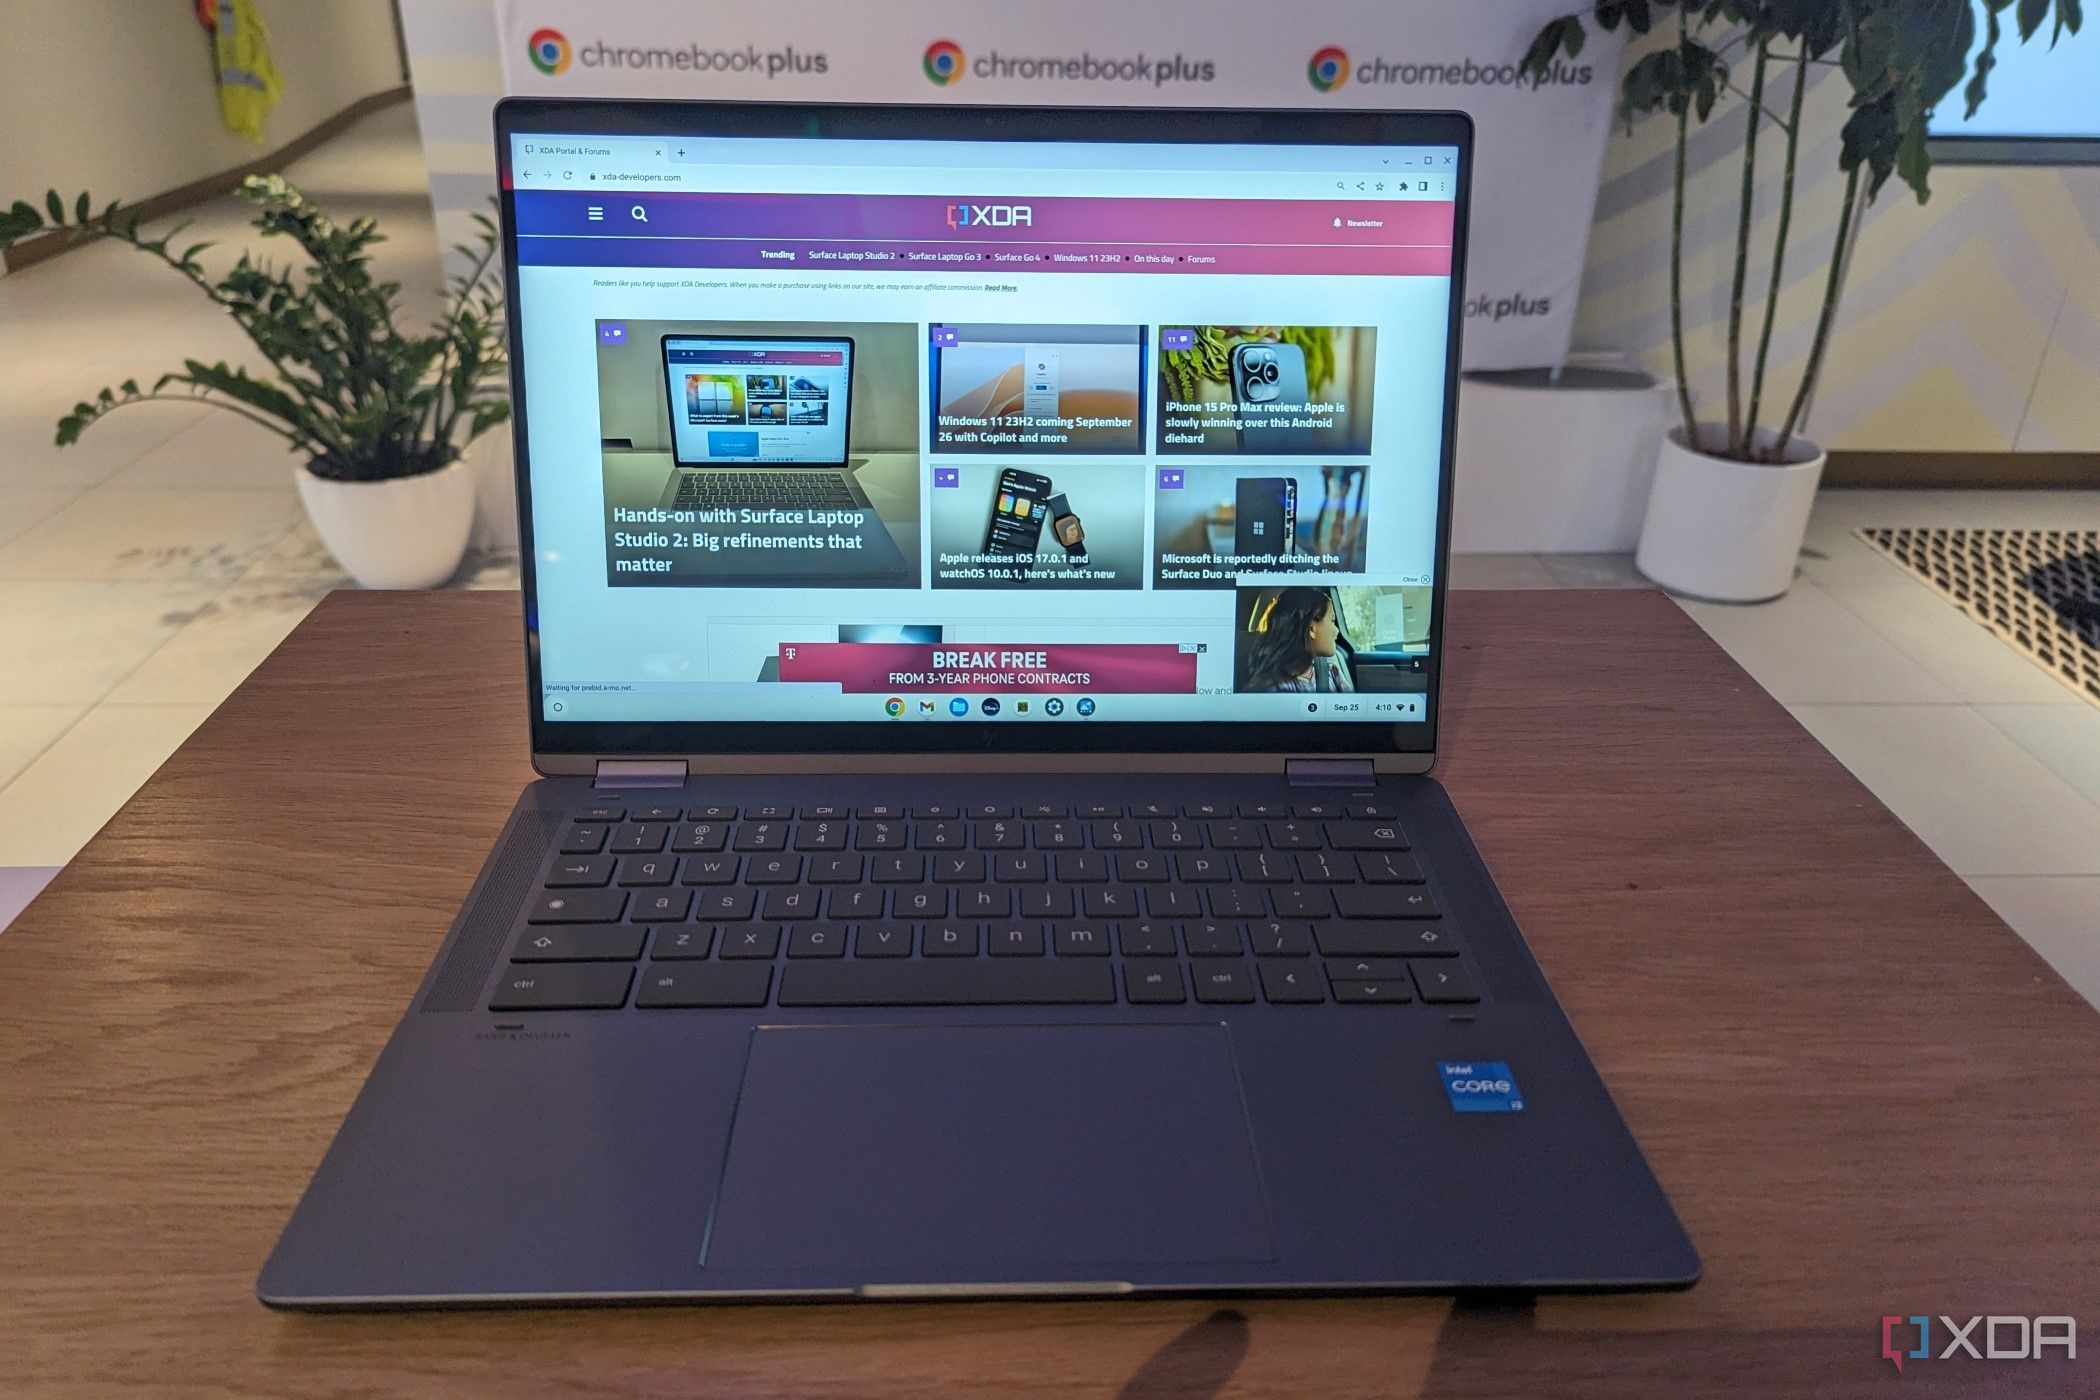 HP Chromebook Plus x360 14c with XDA homepage on the screen